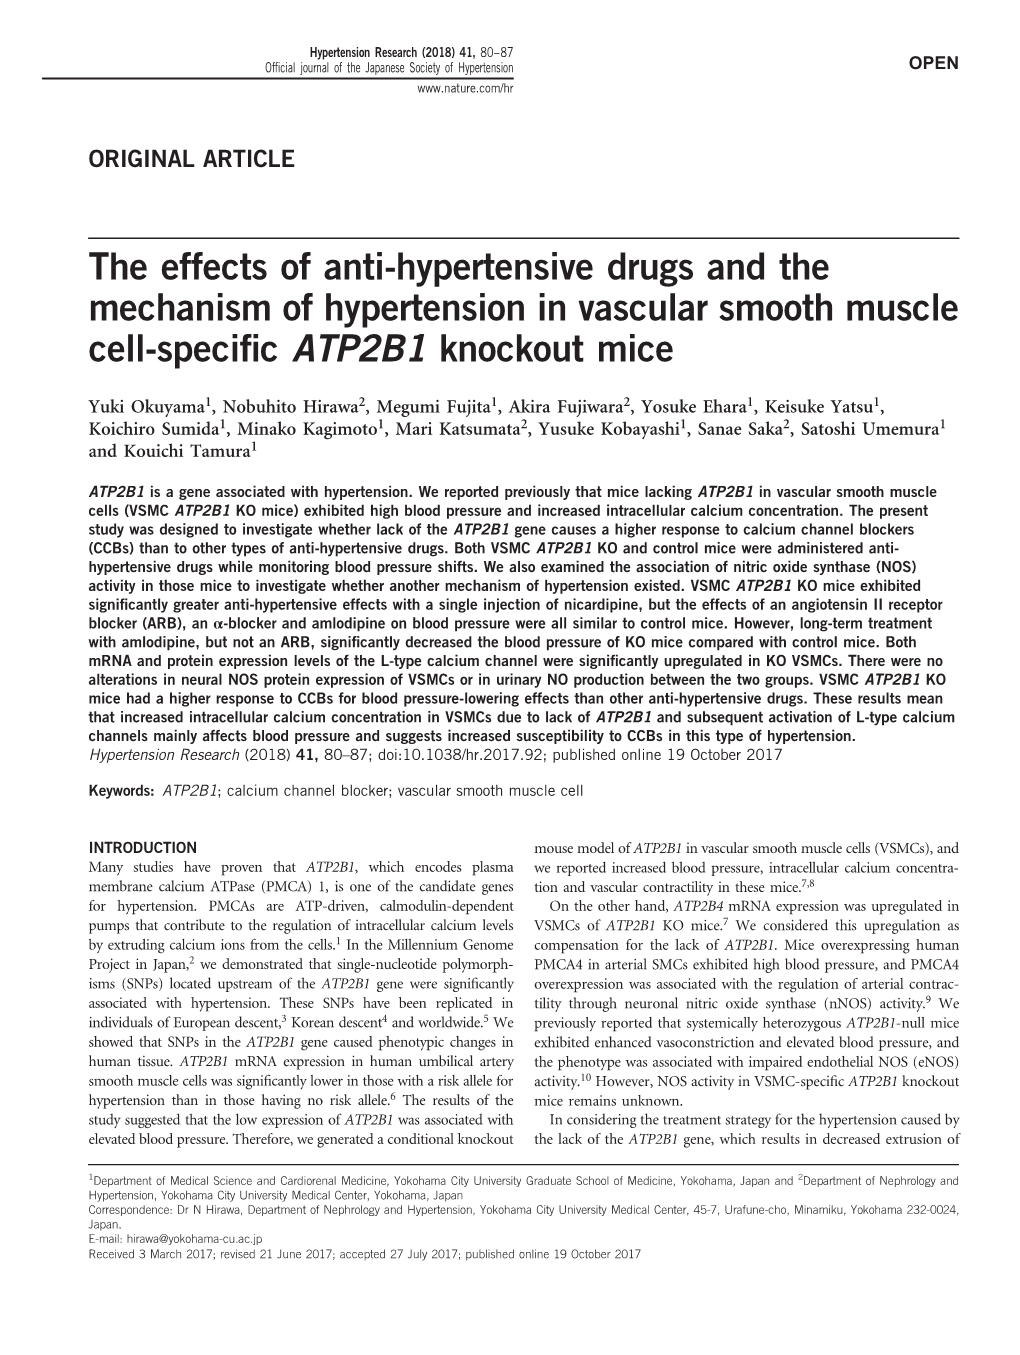 The Effects of Anti-Hypertensive Drugs and the Mechanism of Hypertension in Vascular Smooth Muscle Cell-Speciﬁc ATP2B1 Knockout Mice